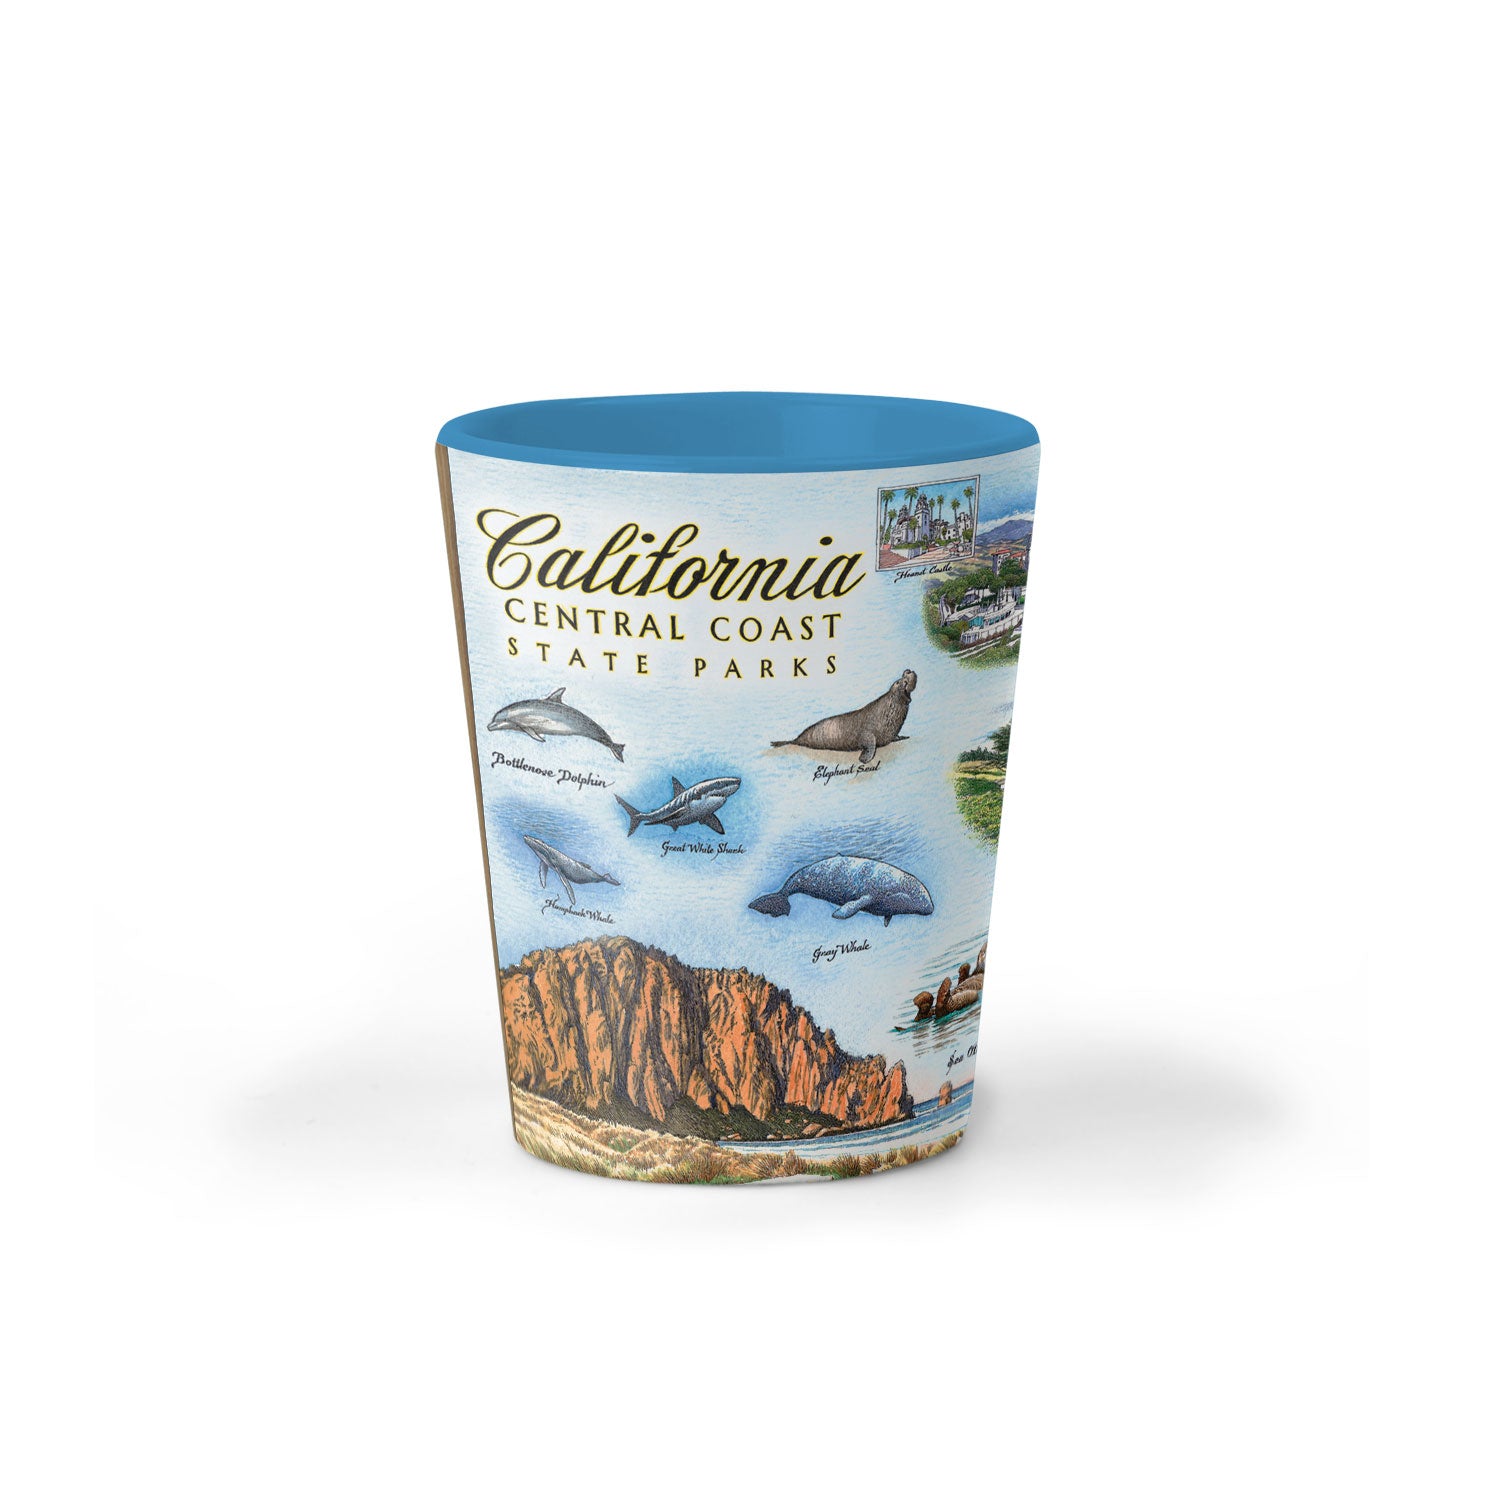 California Central Coast State Map Ceramic shot glass in earth tones. Wildlife viewing is abundant with sea life, birding, and terrestrial creatures. Cultural history is rich in the area with the fame of Hearst Castle, Ranchers of Montana De Oro, Dunites of Oceano Dunes, and Native people that have lived on this land for thousands of years from San Francisco to Los Angeles. See butterflies, bears, seals, otters, whales, and more!